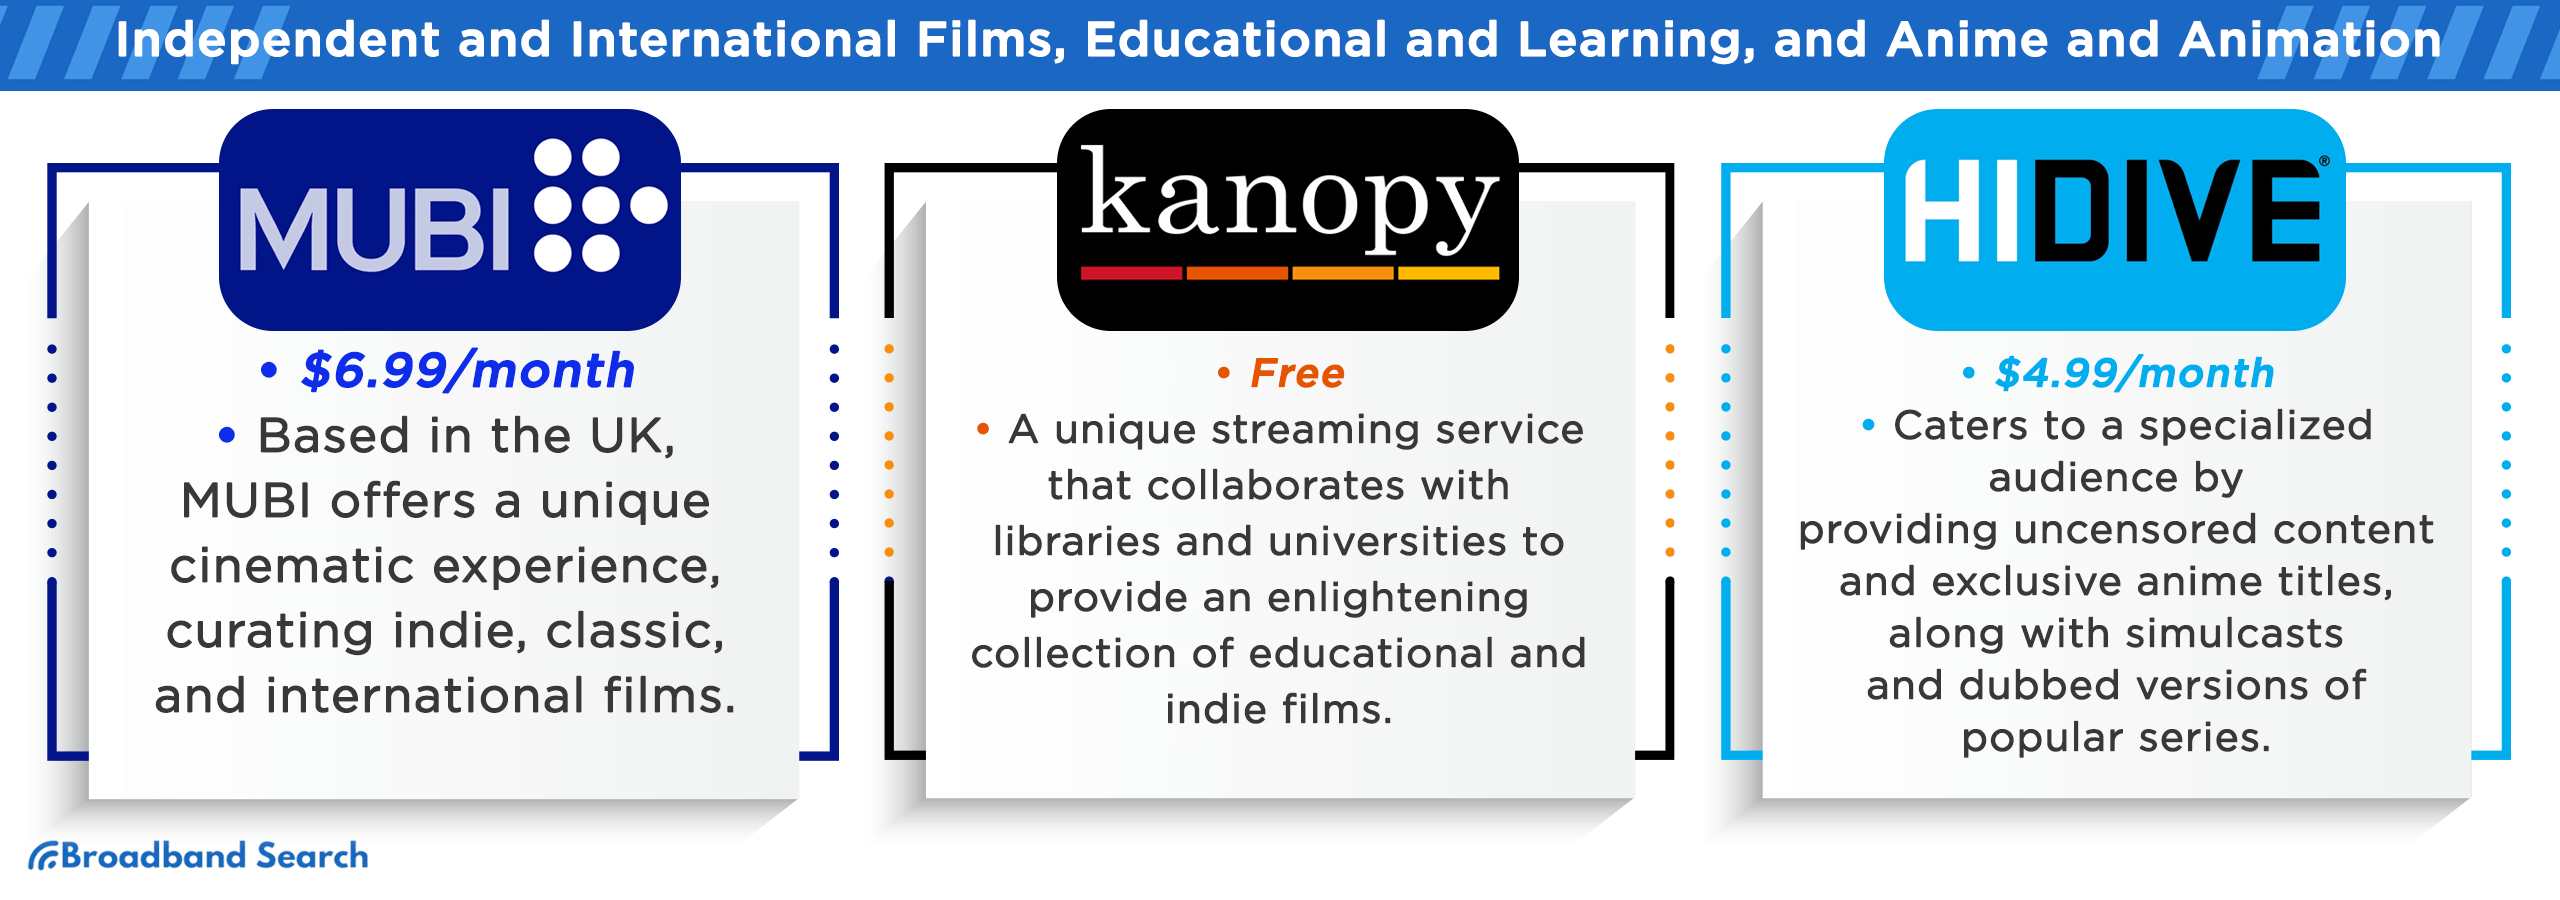 Details on Streaming services that specializes in independent and international films, educaitonal and learning, and anime and animation